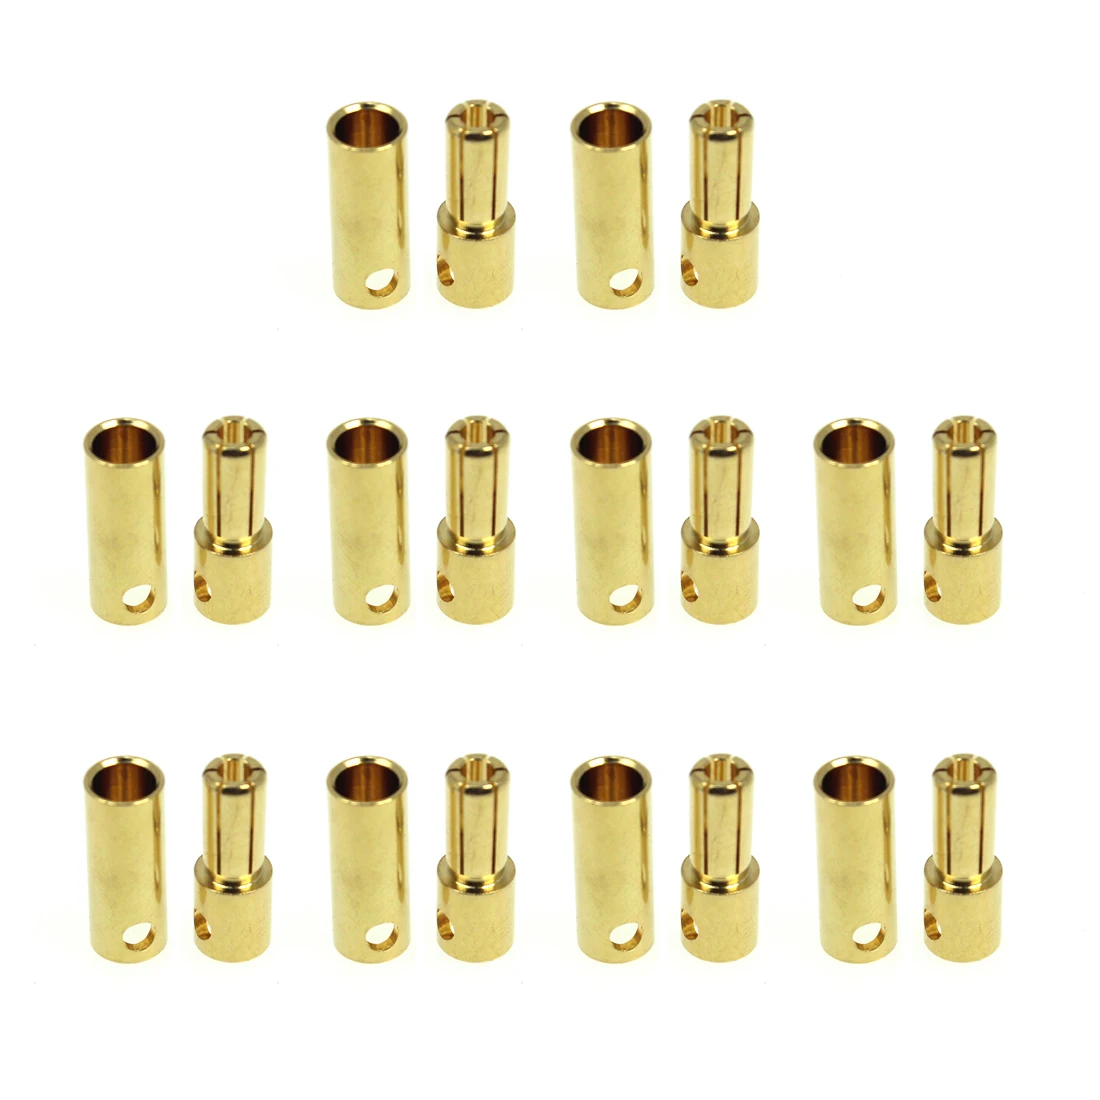 2mm 4mm 5mm 8mm Gold Bullet Banana Connector plug Male Female Thick Gold Plated for ESC Battery 100pairs included F19225-100